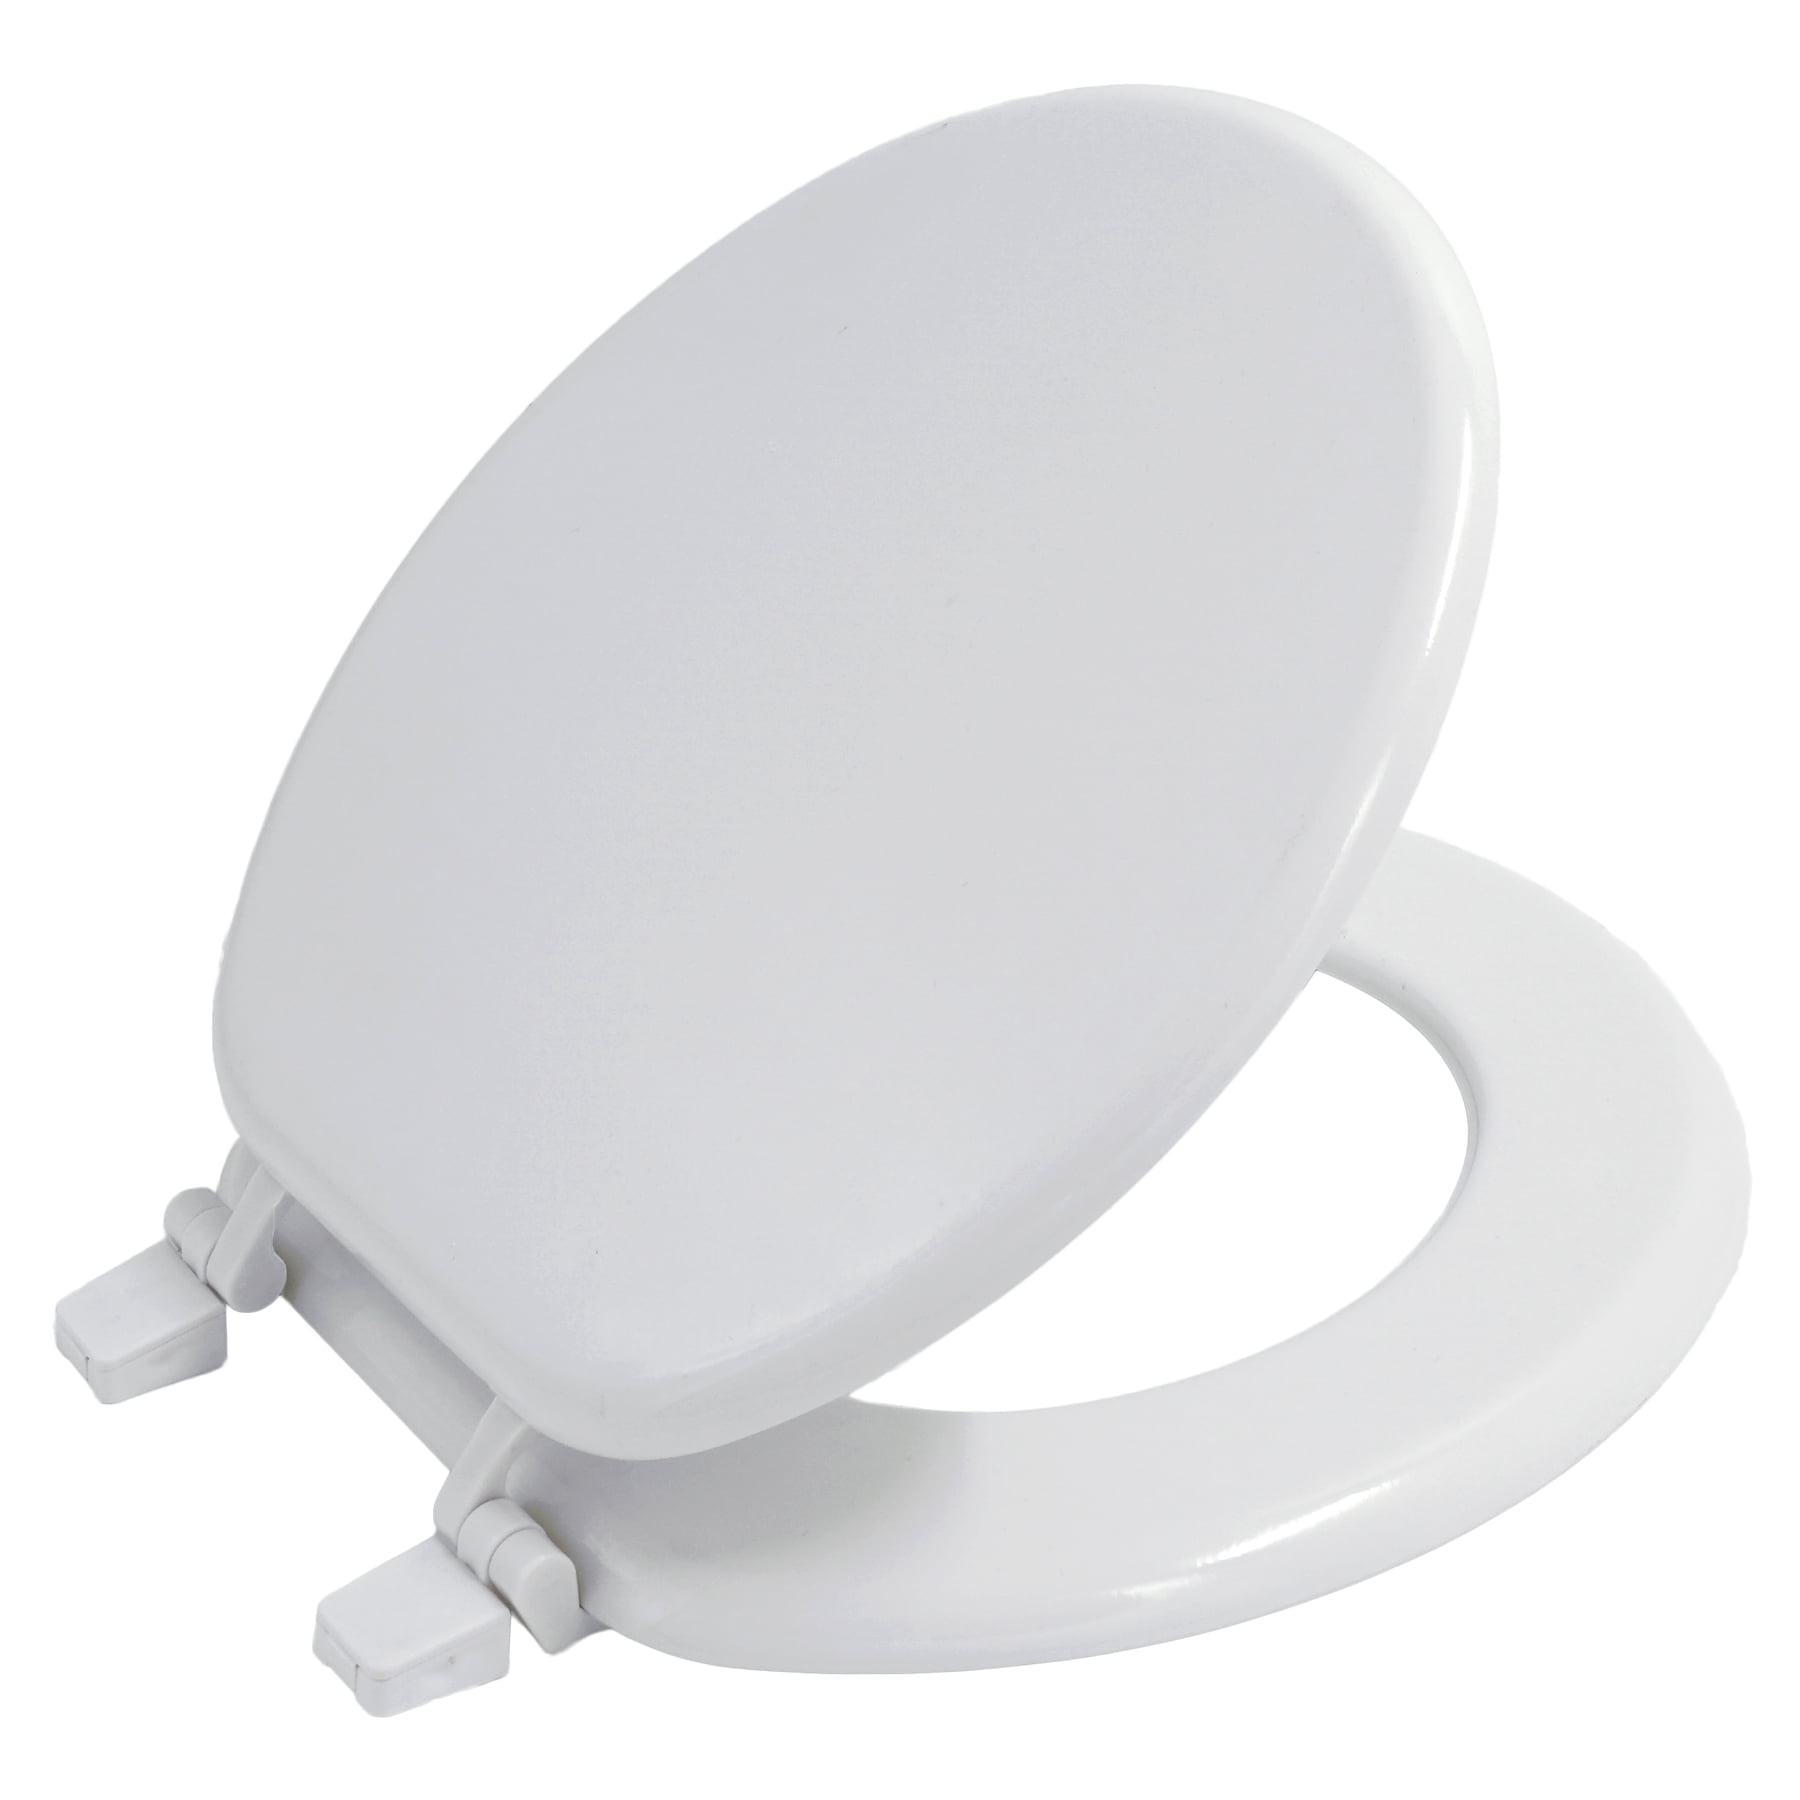 White Mayfair 44ECA-000 Round Molded Wood Toilet Seat with Easy-Clean Hinge 